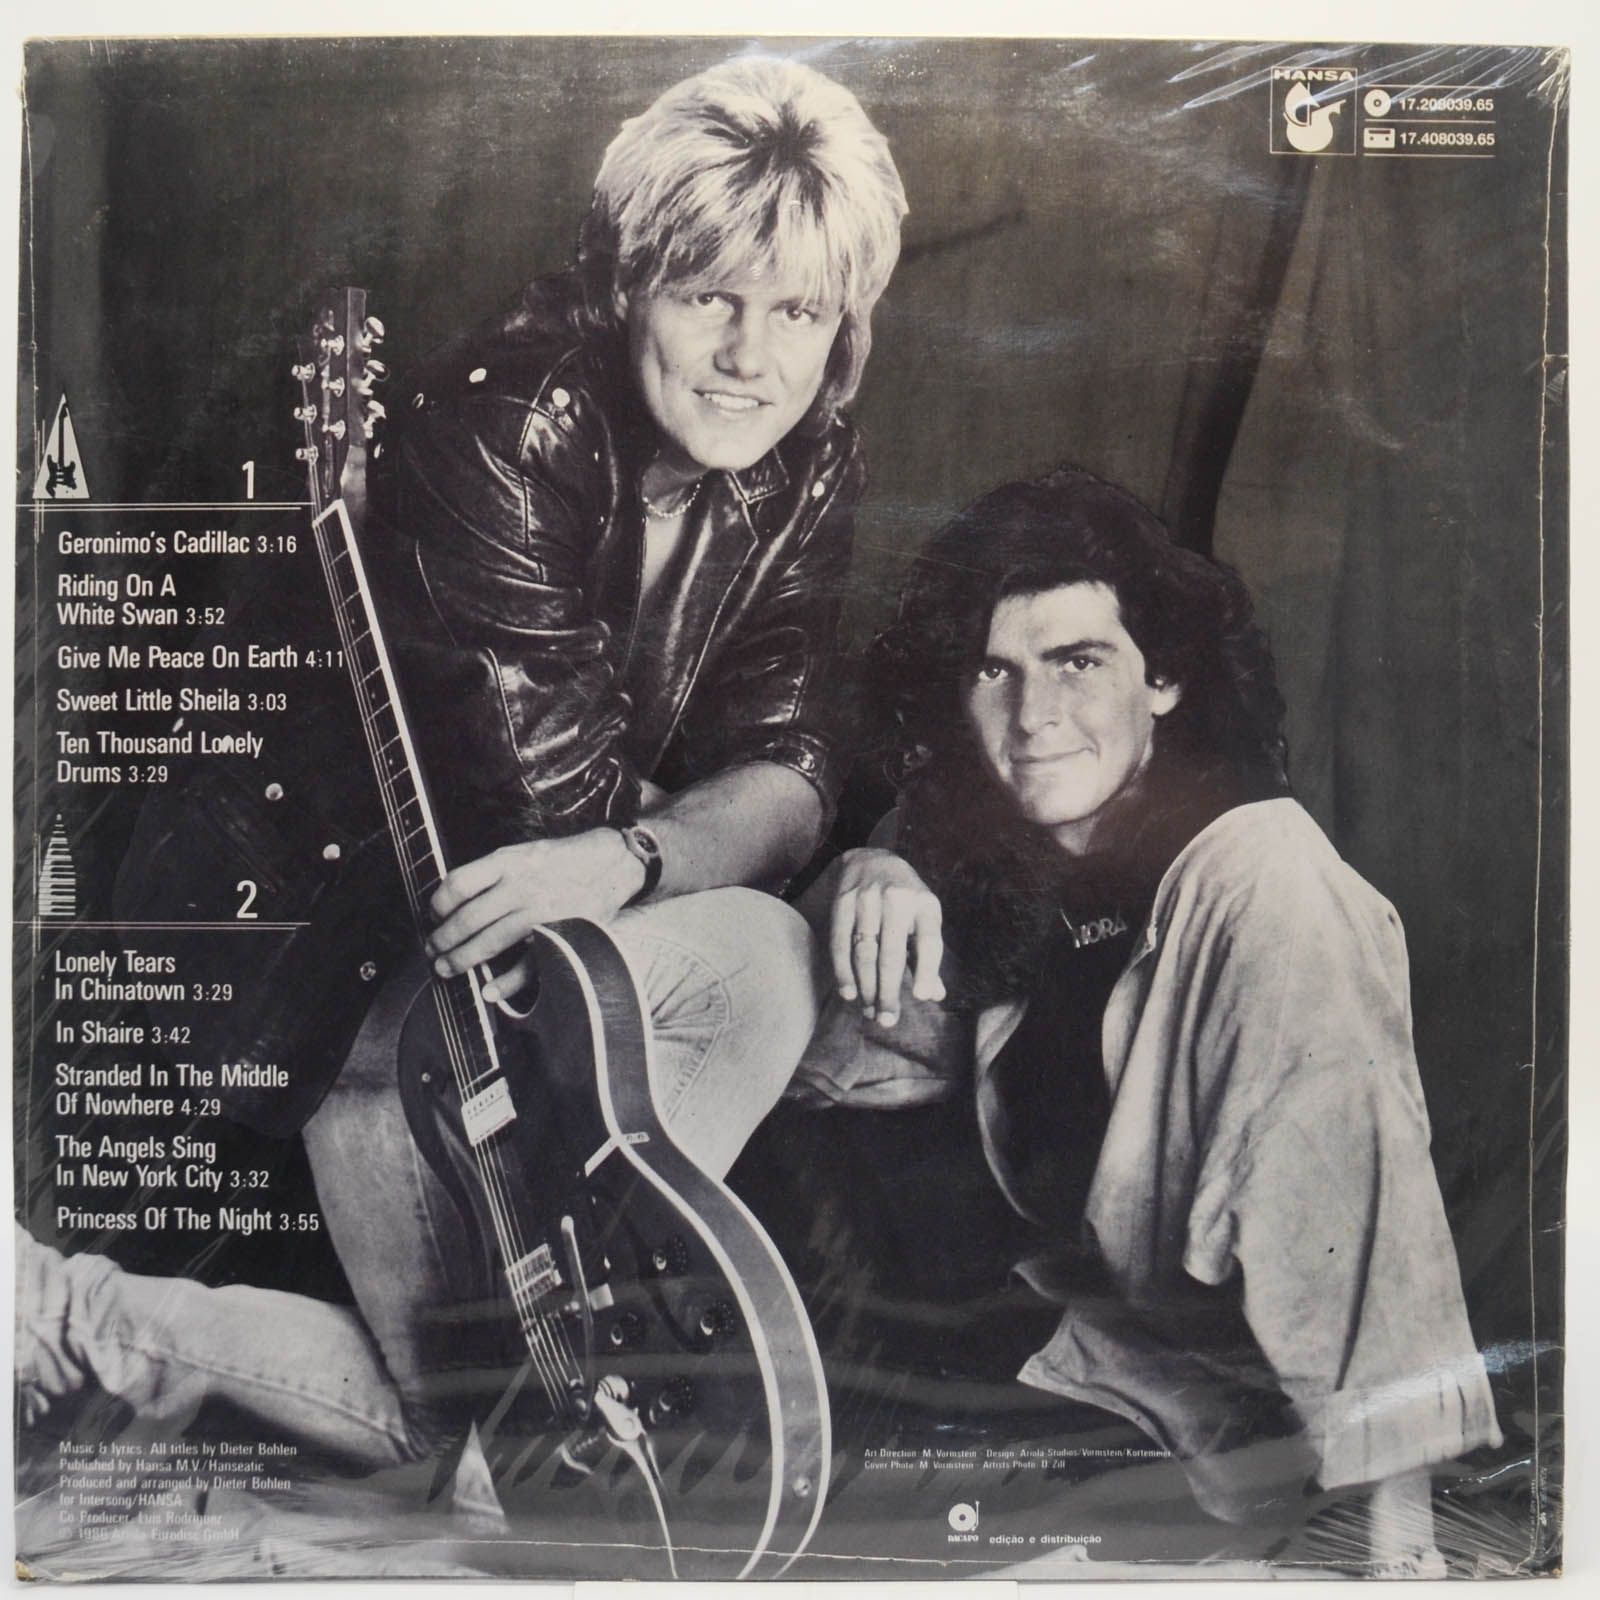 Modern Talking — In The Middle Of Nowhere - The 4th Album, 1986